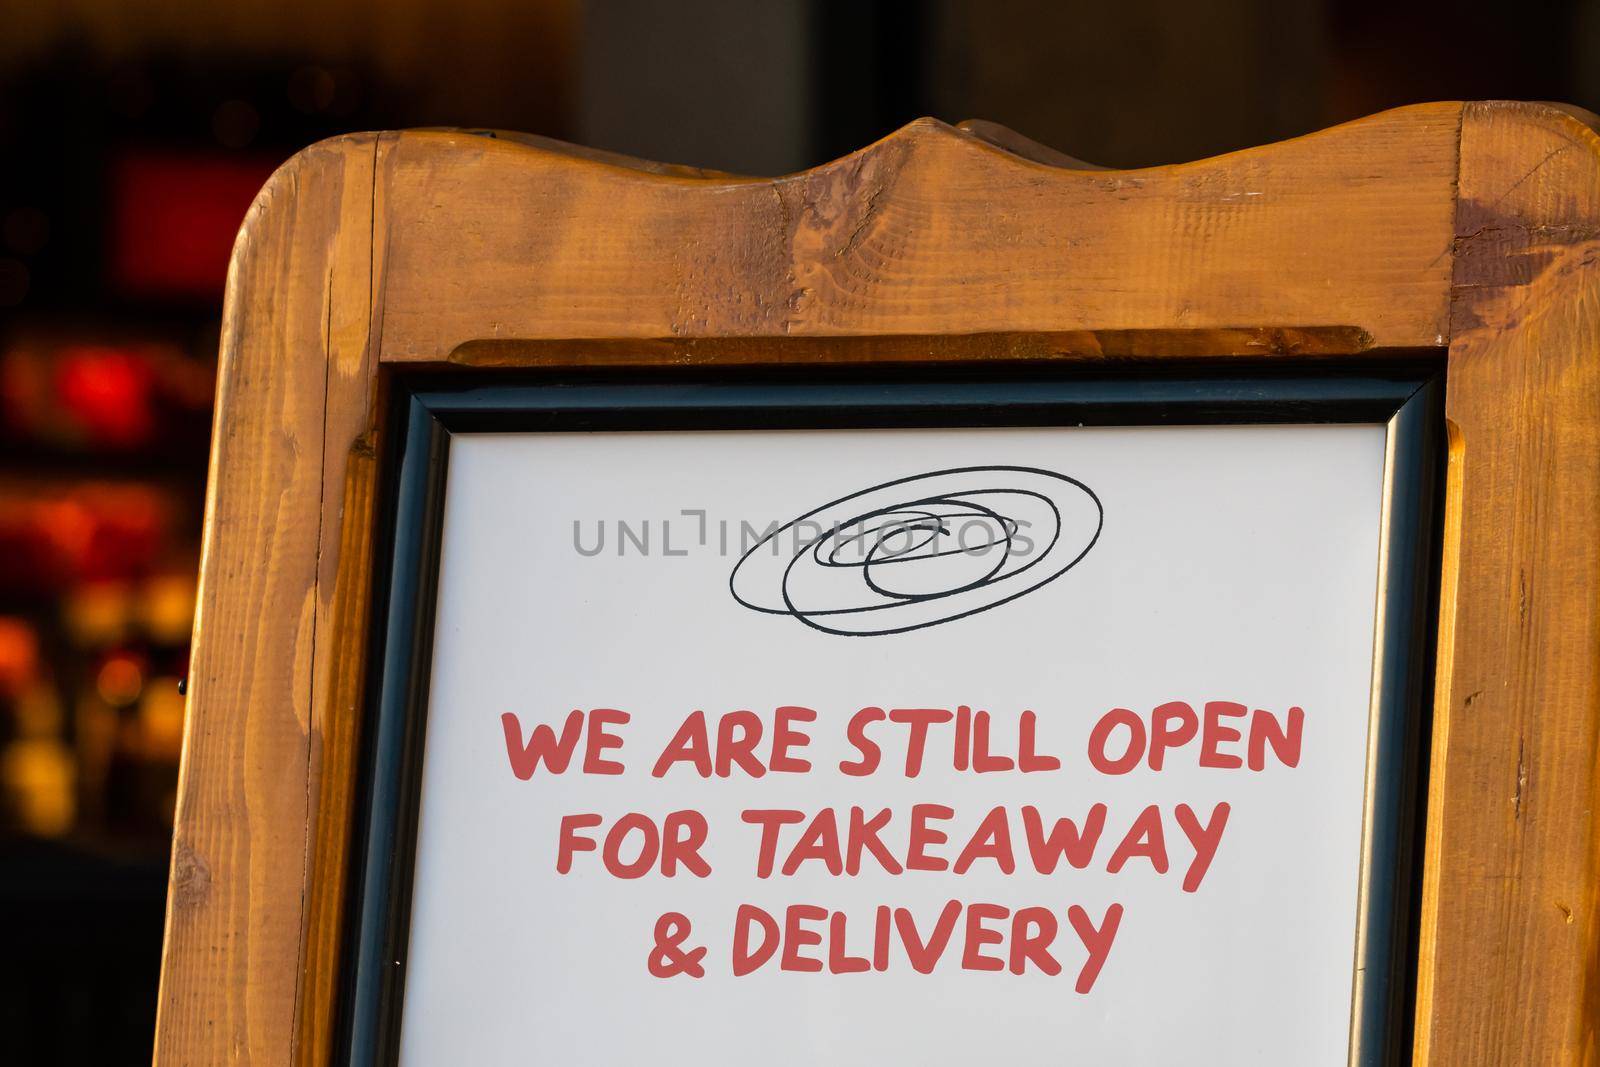 Open take away only sign during lockdown caused by Covid-19 pandemic by mauricallari